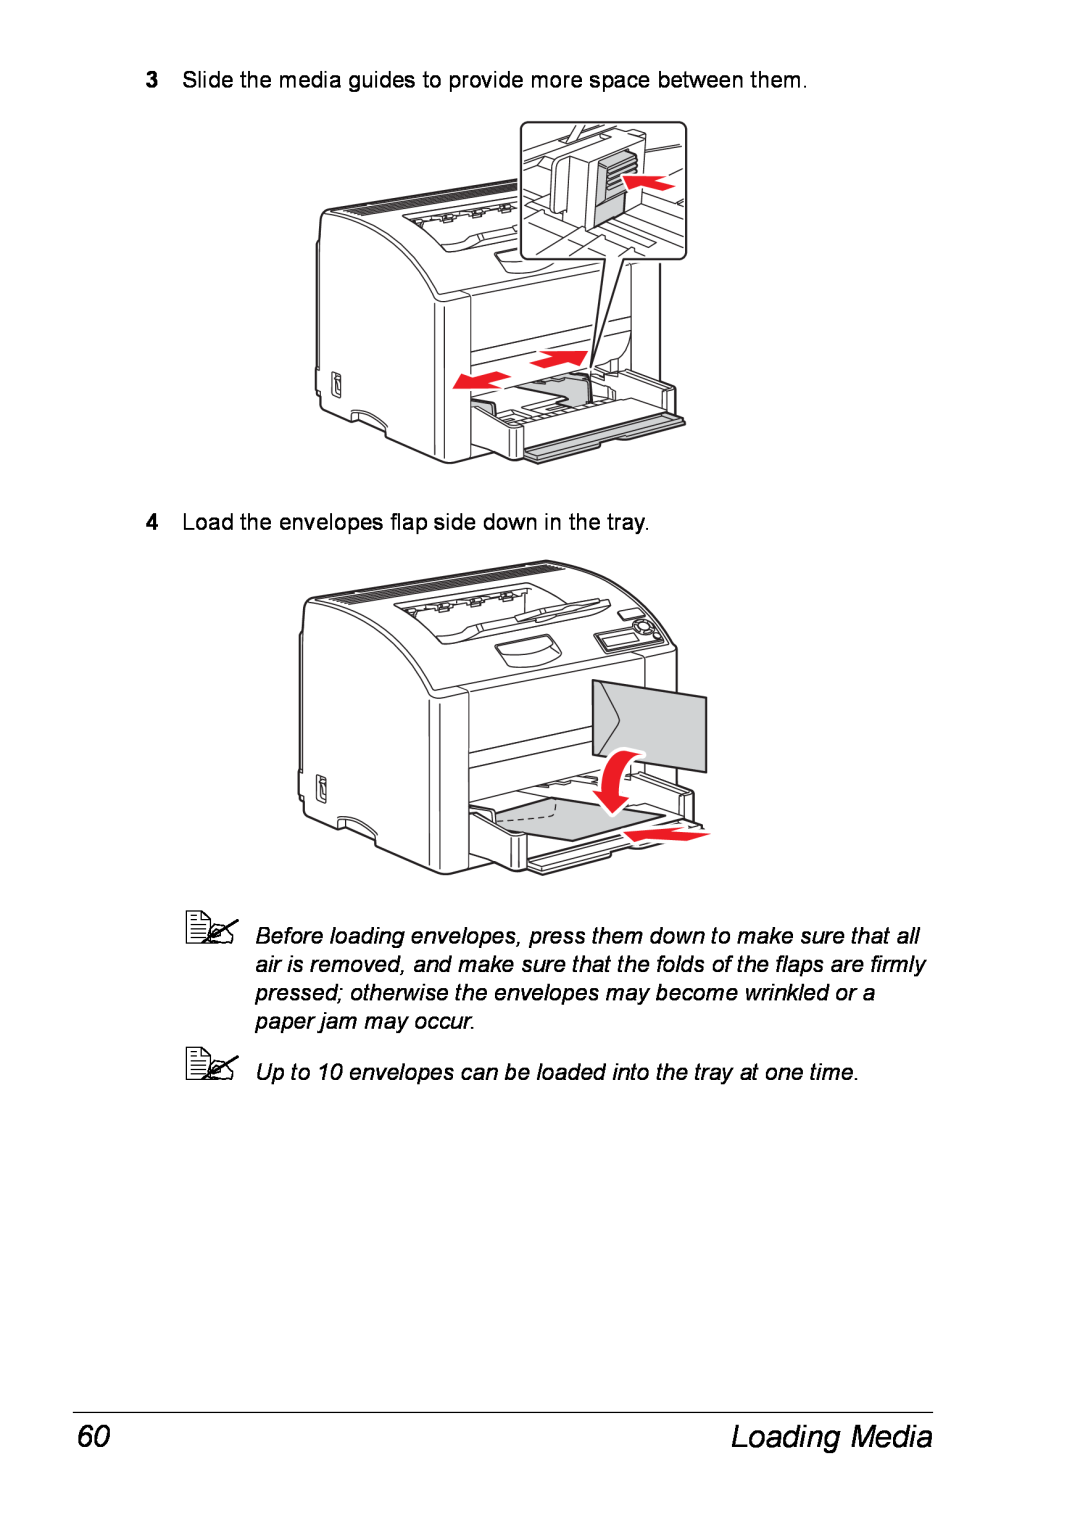 Xerox 6120 manual Loading Media, Slide the media guides to provide more space between them 